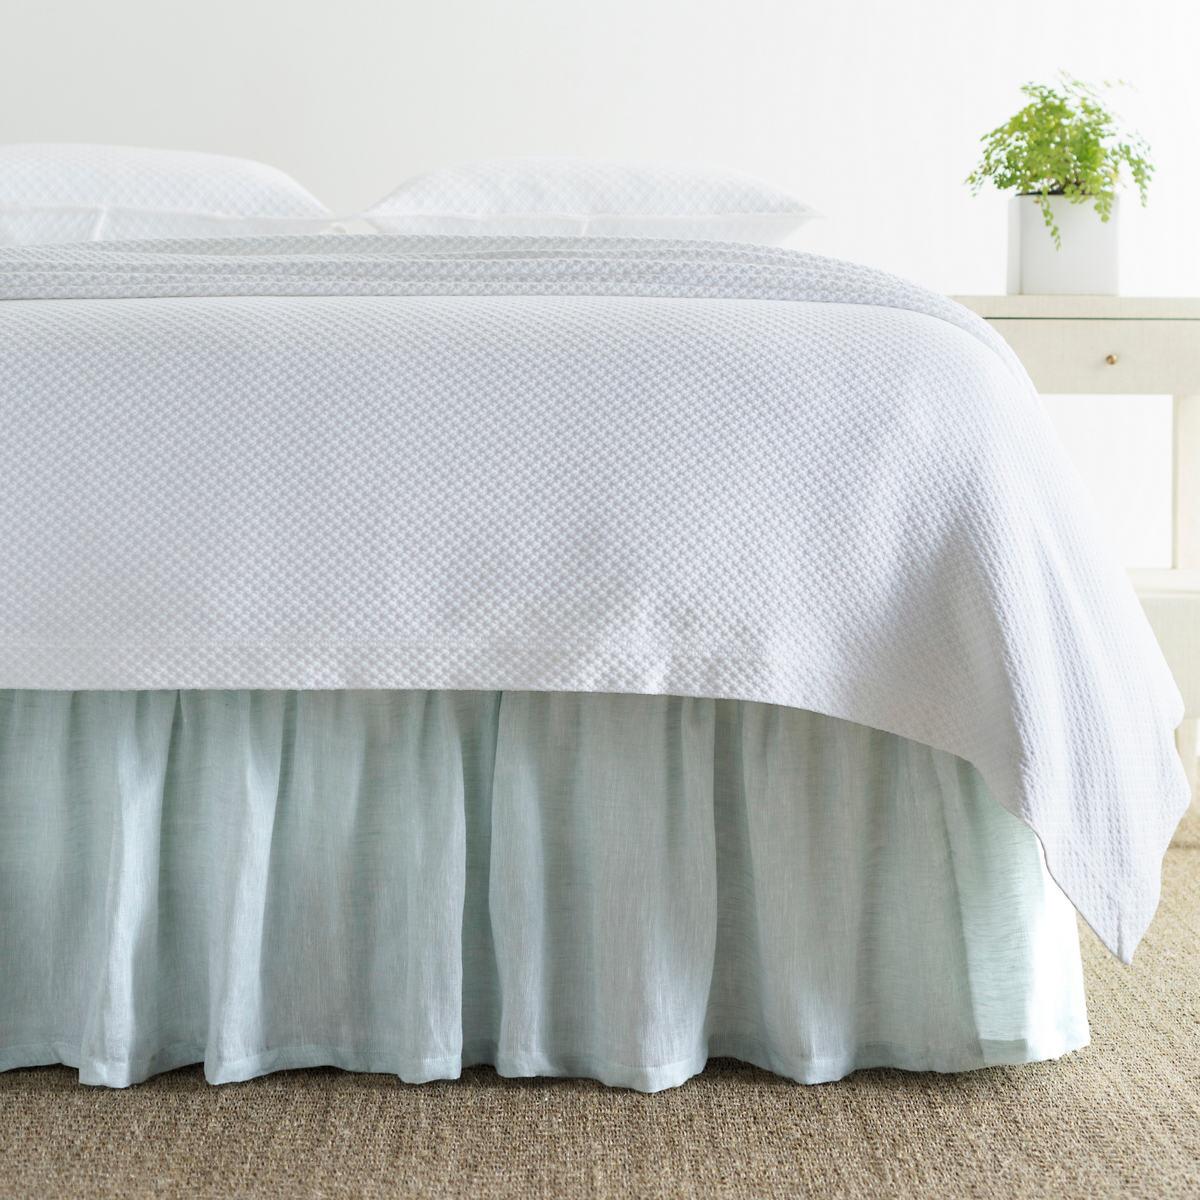 Savannah Linen Chambray Sky Bed Skirt The Outlet